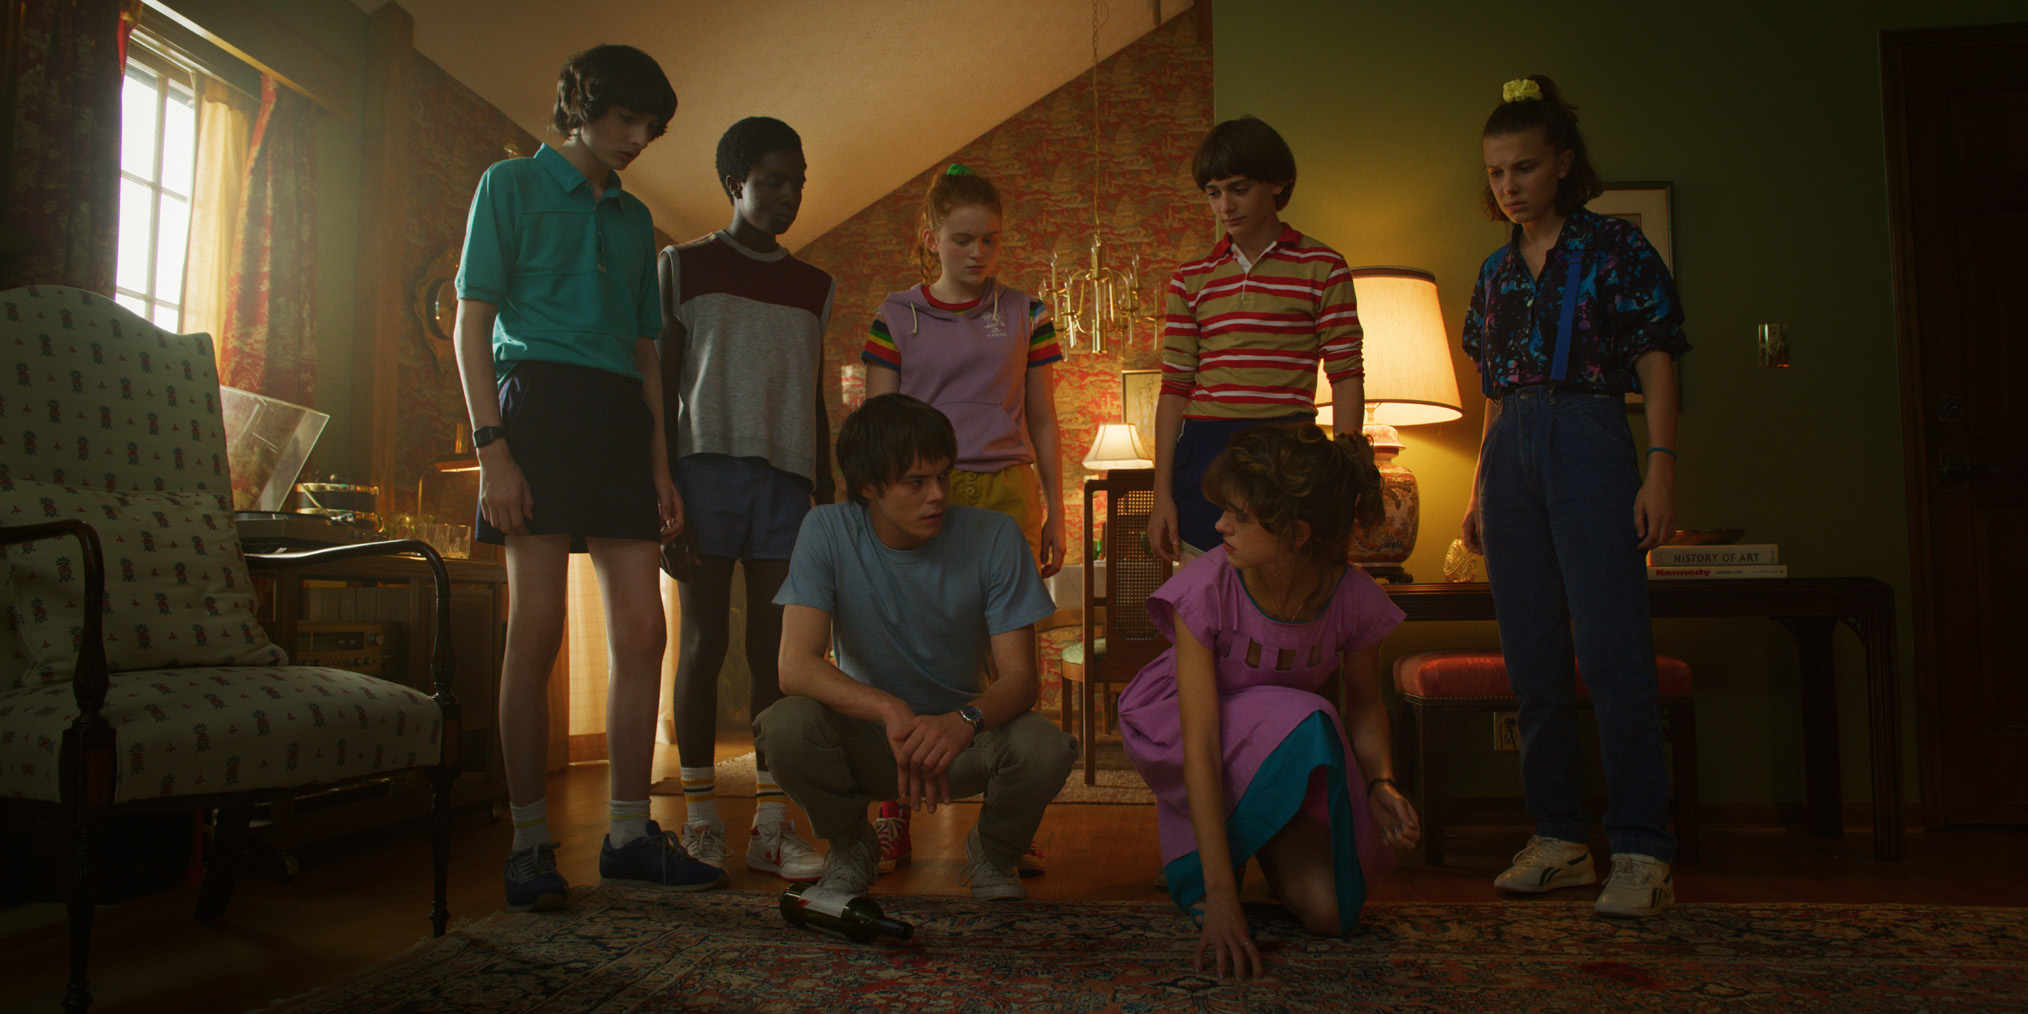 Body Horror and Belly Laughs in 'Stranger Things 3' Episode 5 (RECAP)